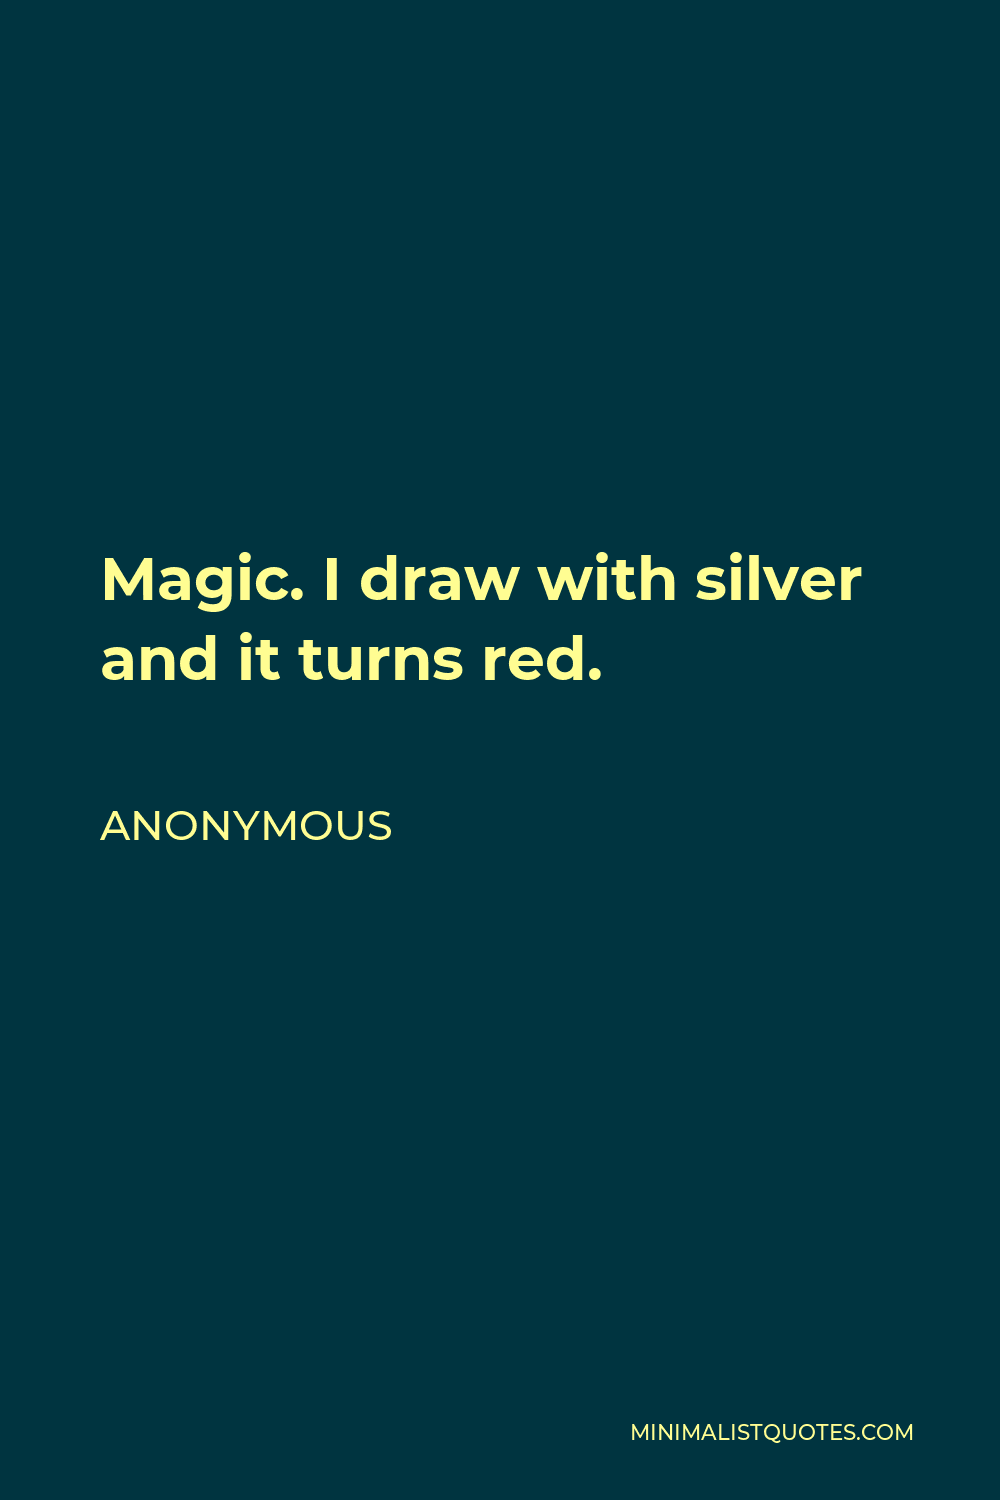 Anonymous Quote - Magic. I draw with silver and it turns red.